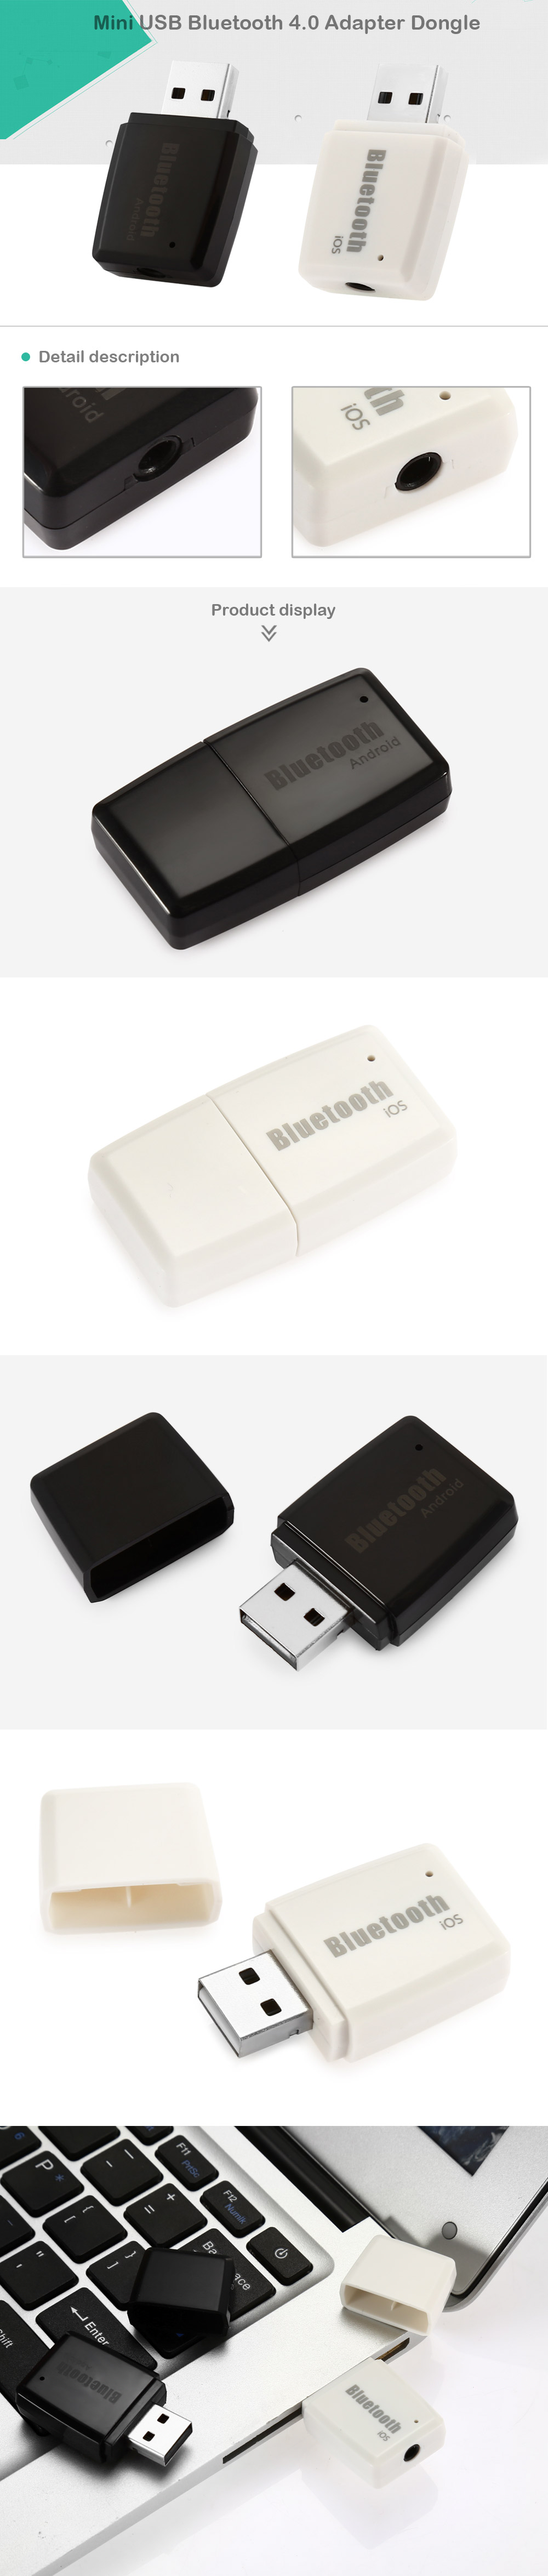 Mini USB Bluetooth 4.0 Adapter Dongle with High Quality